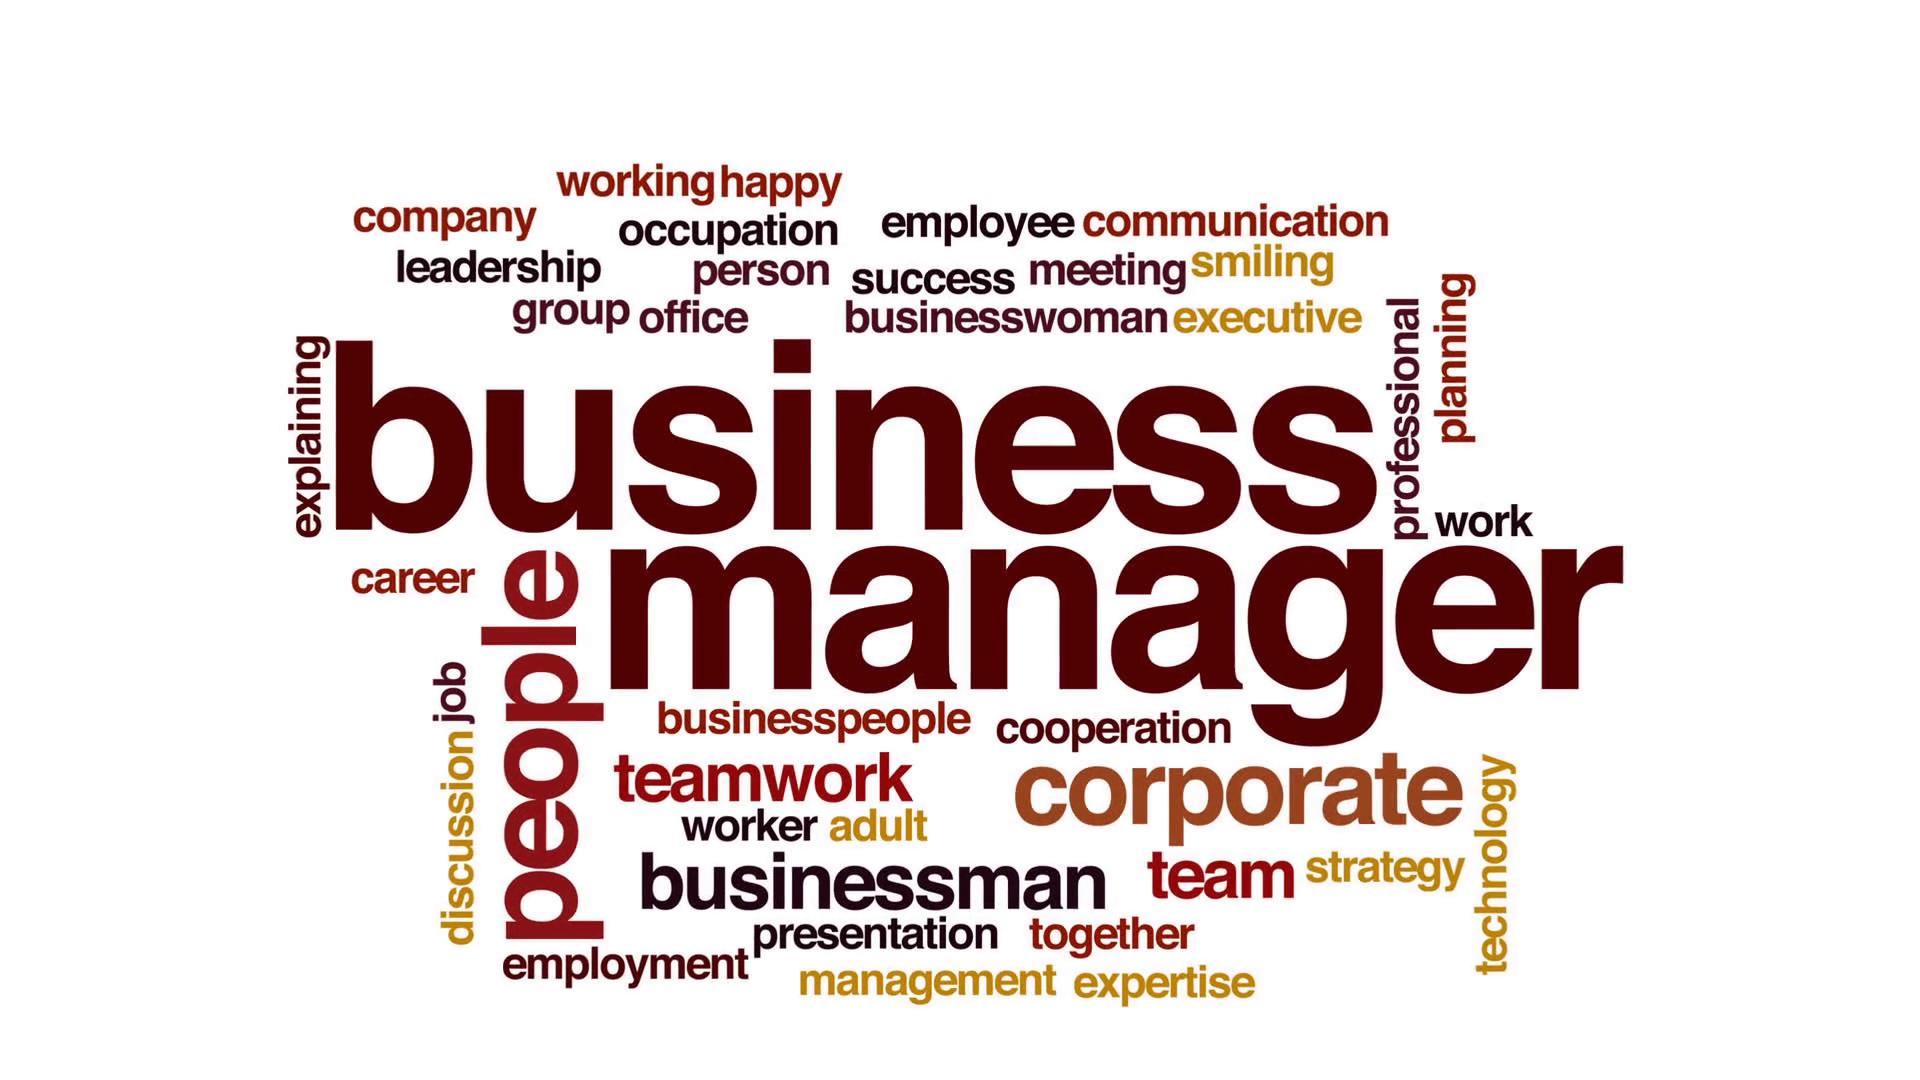 business-manager-animated-word-cloud_rulyleslg_thumbnail-full07.png